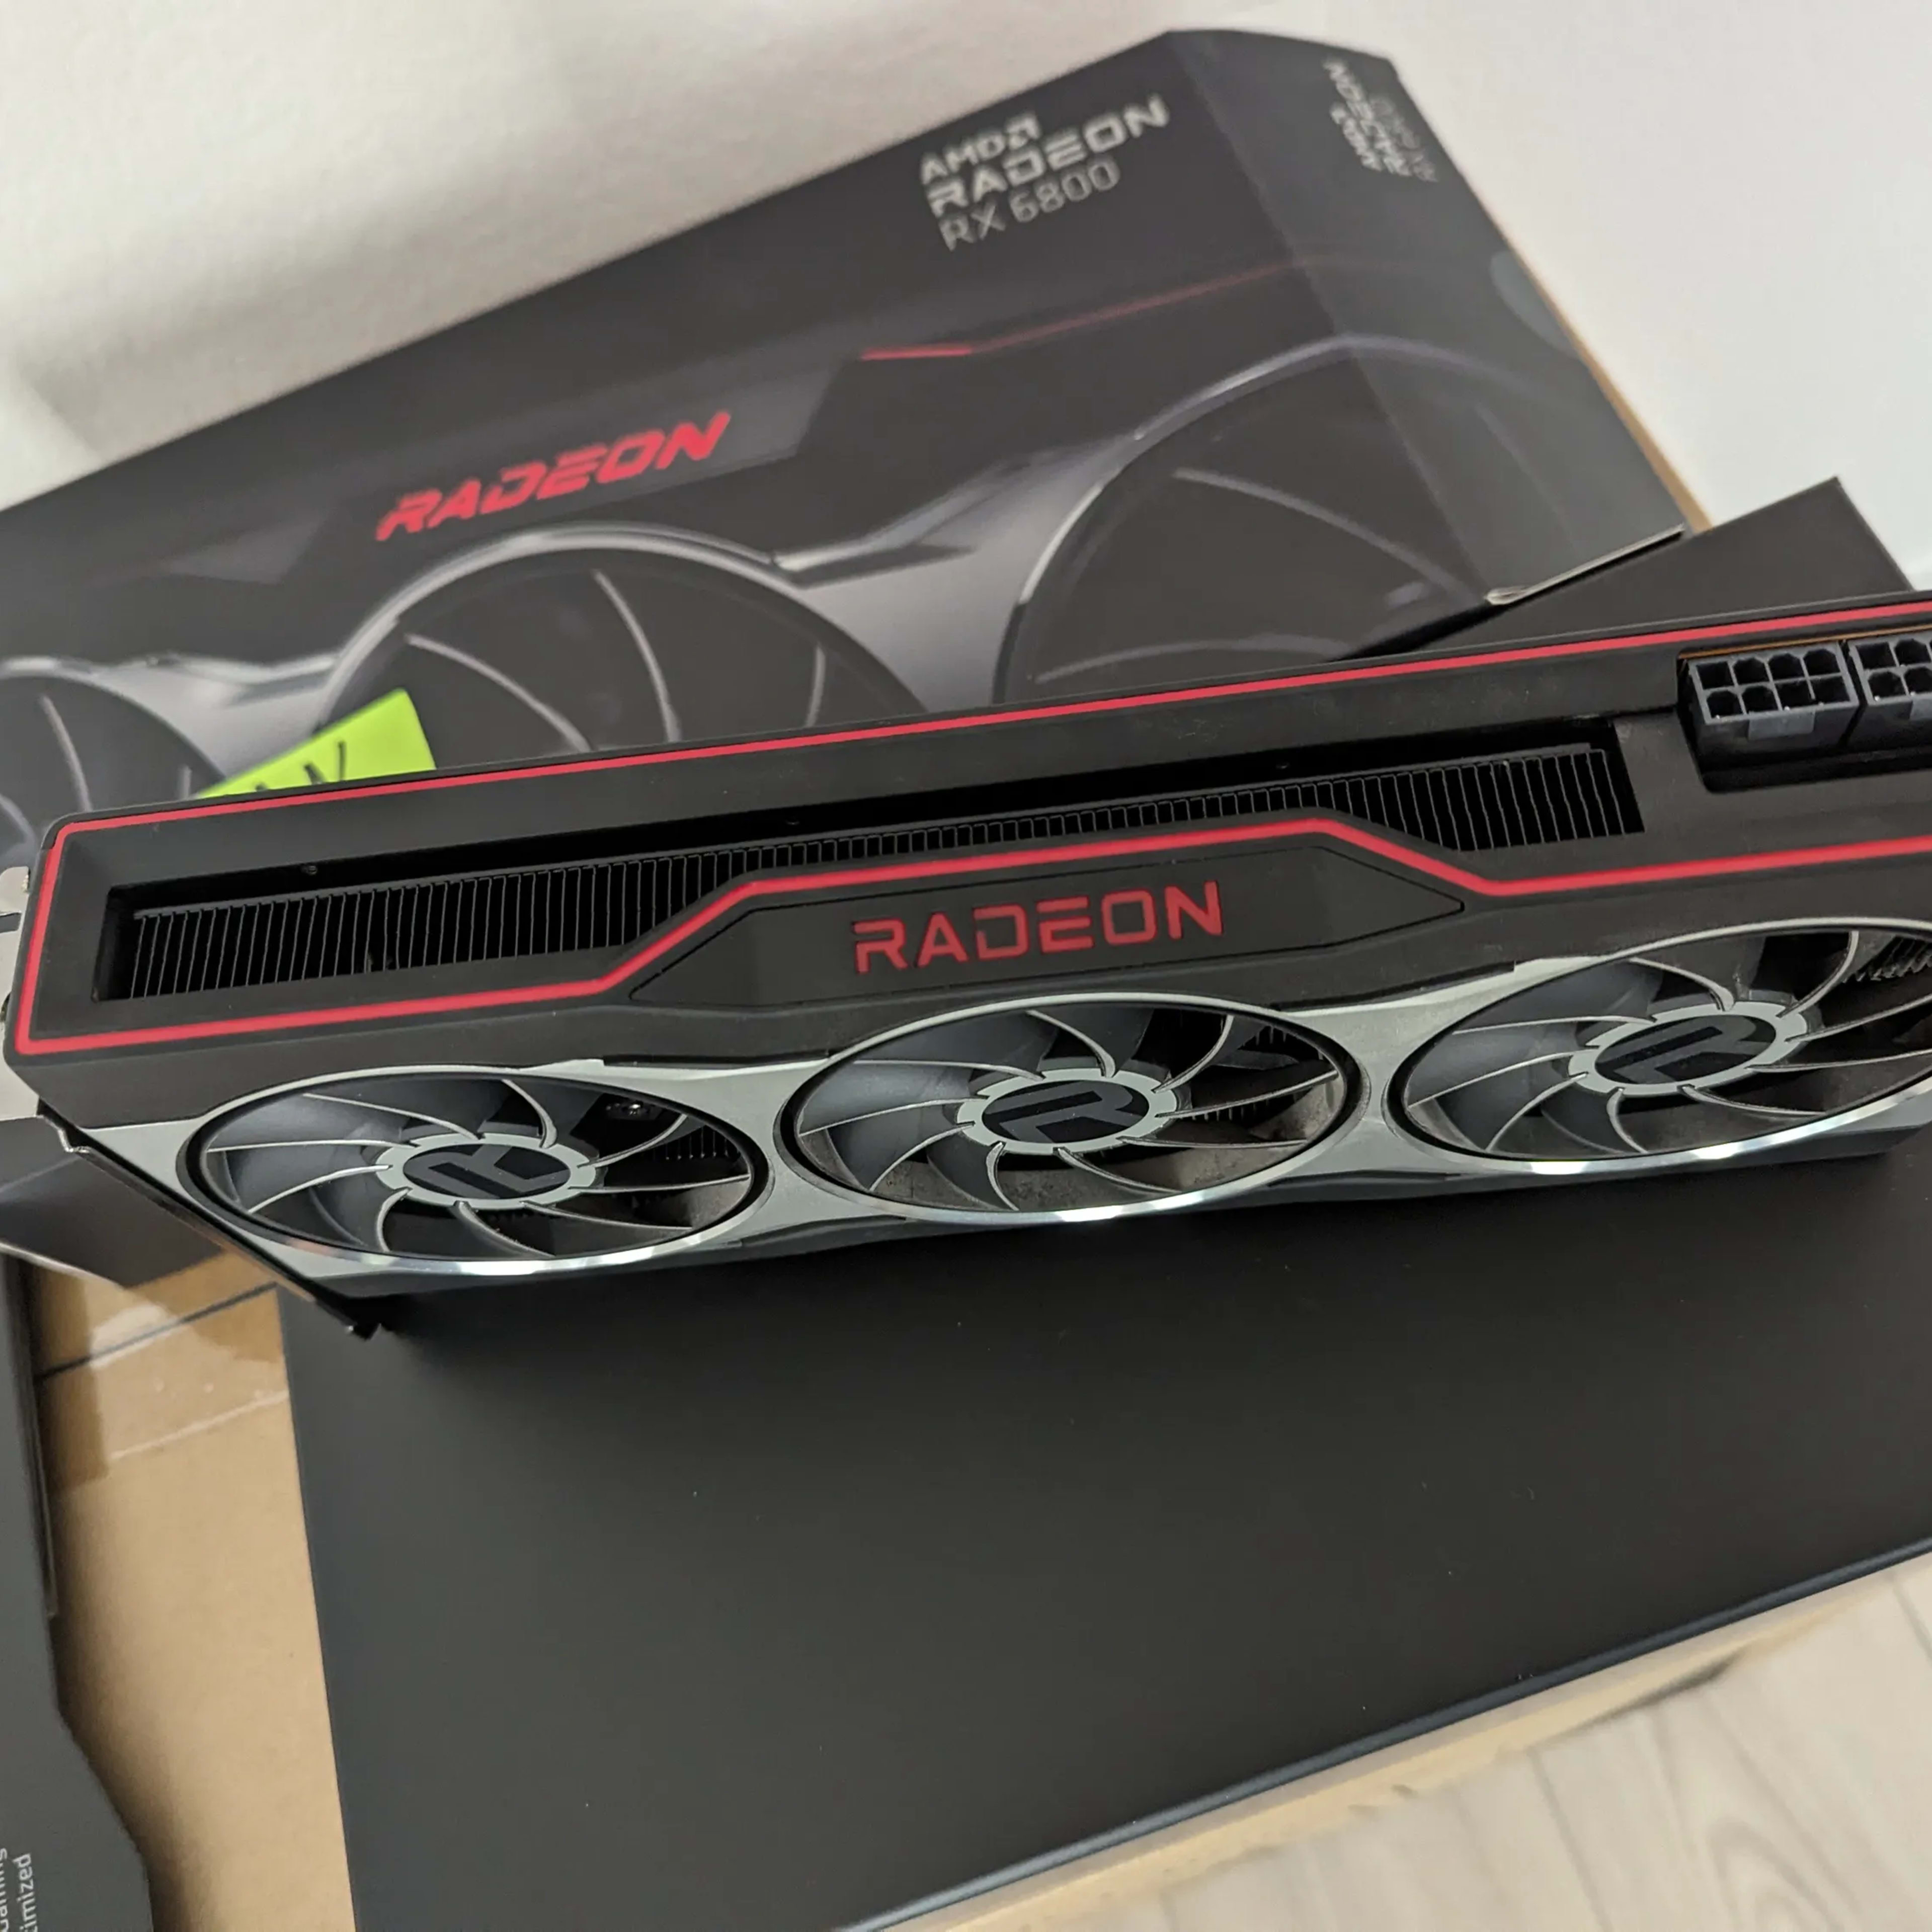 AMD Radeon RX 6800 Graphics Card Reference Model